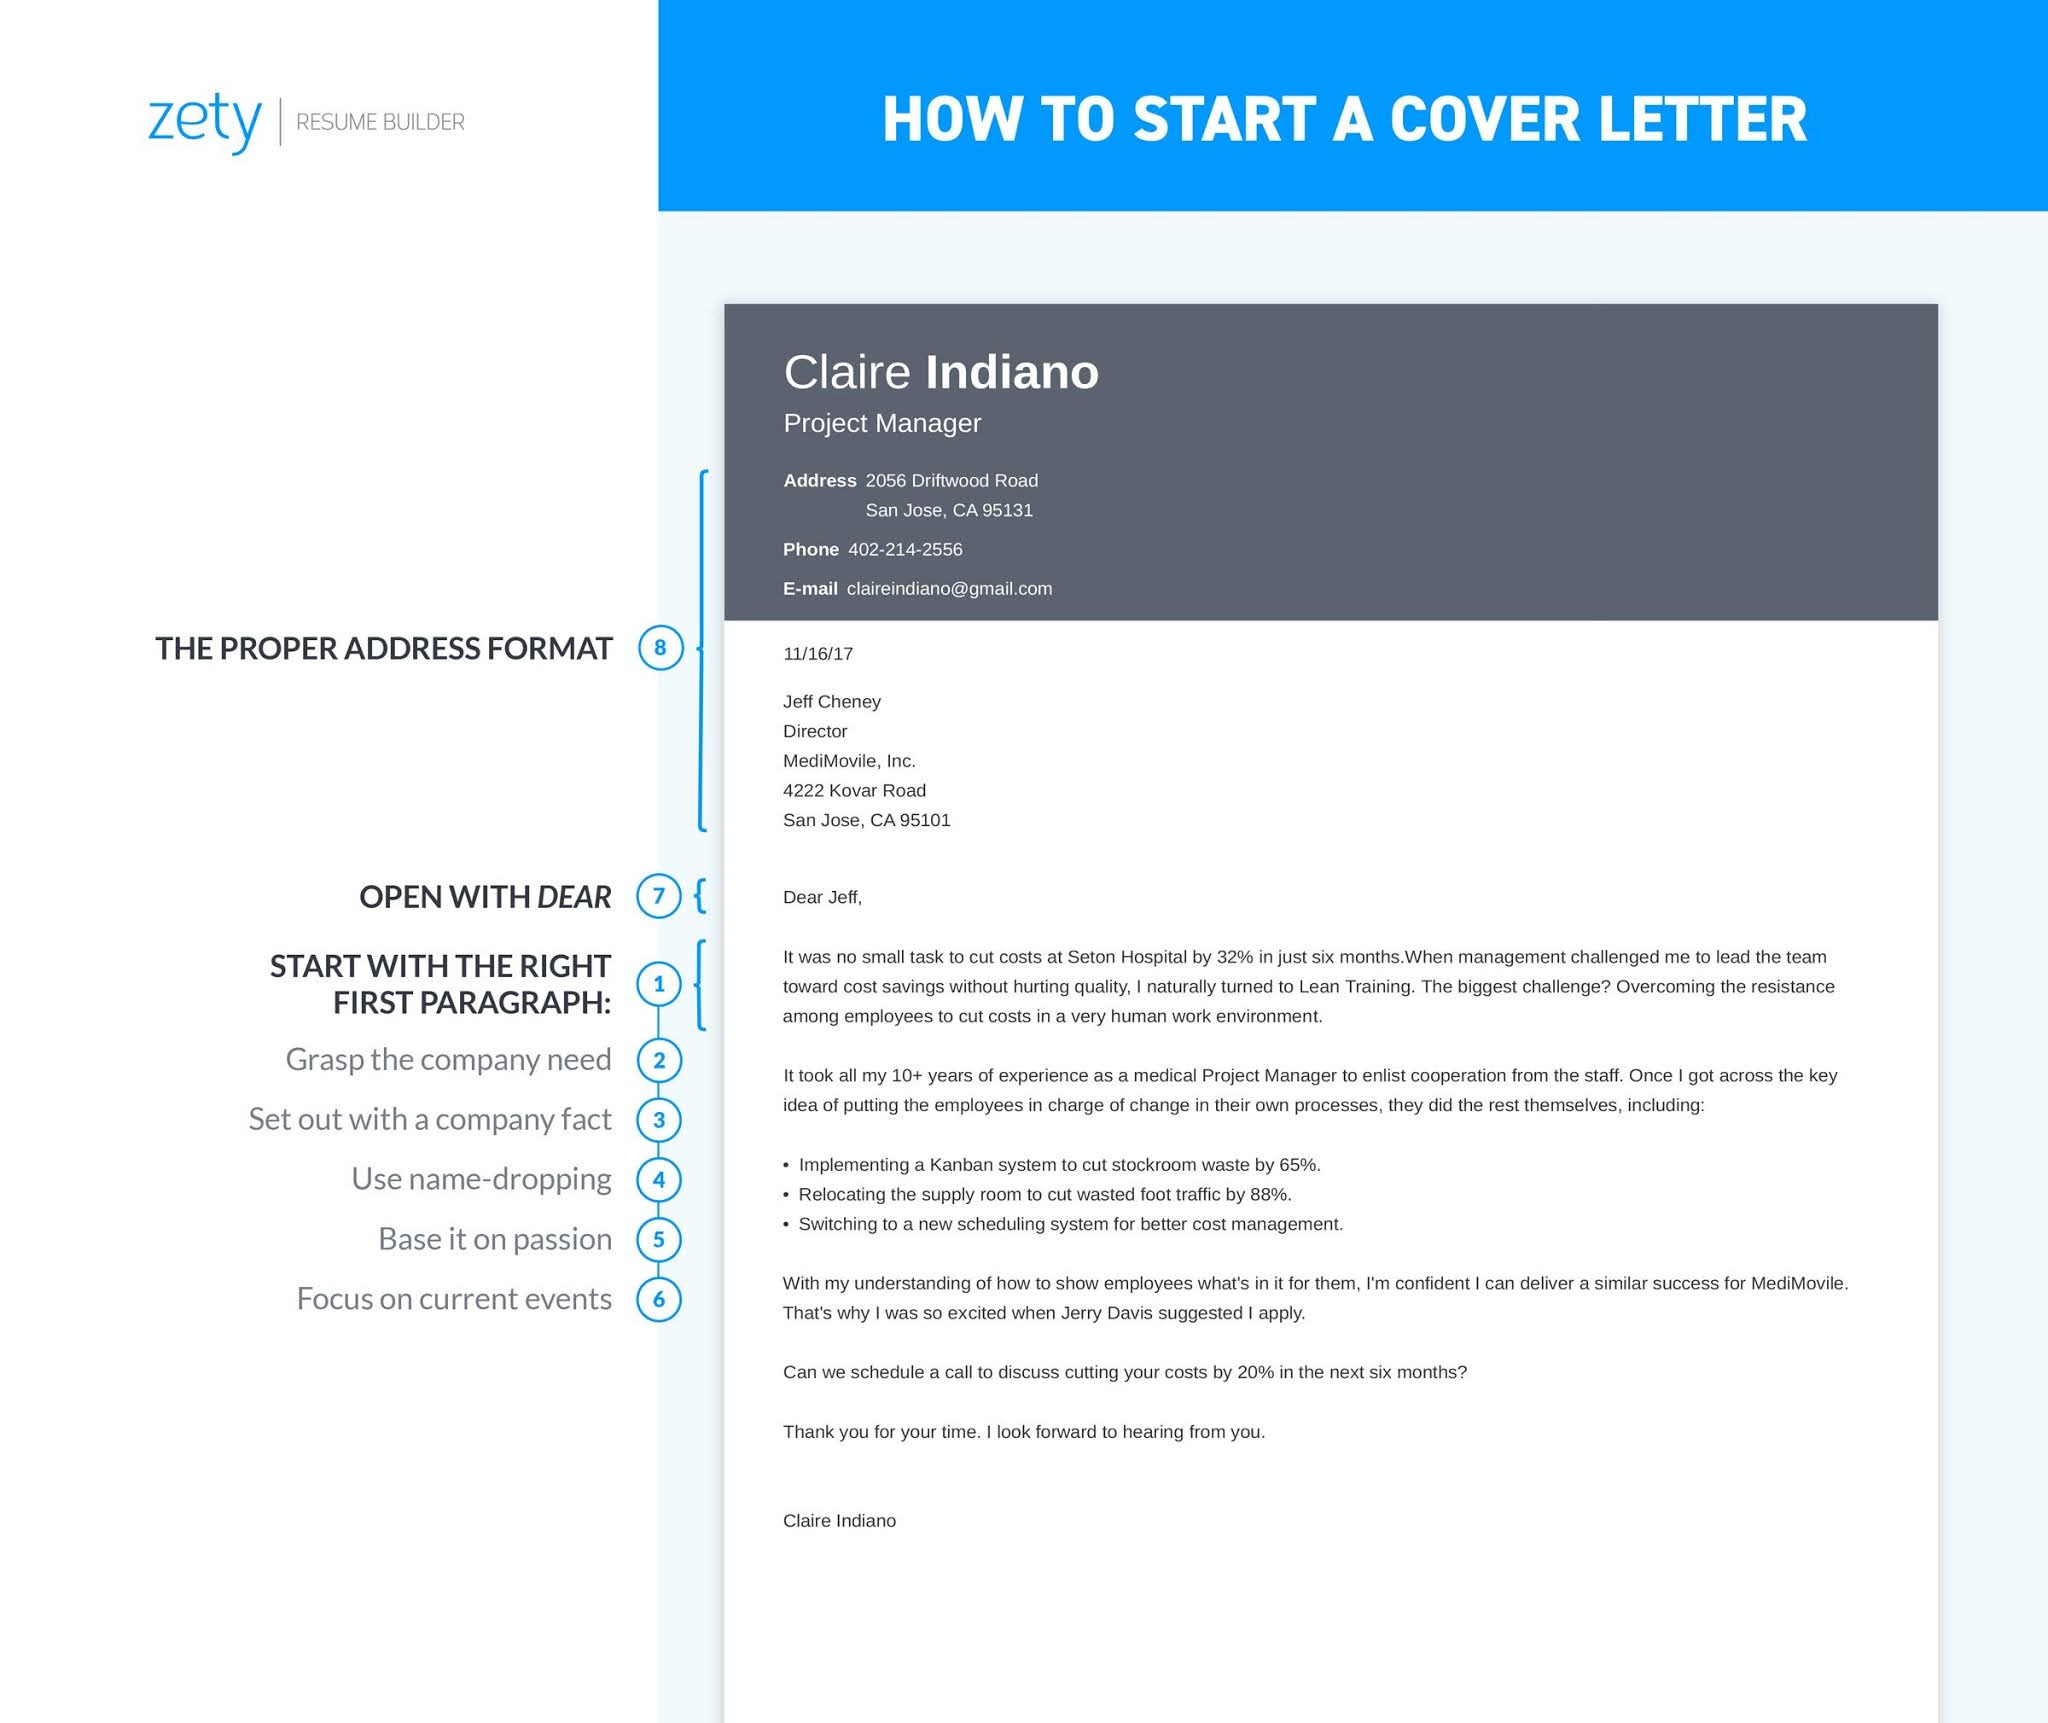 opening of a cover letter